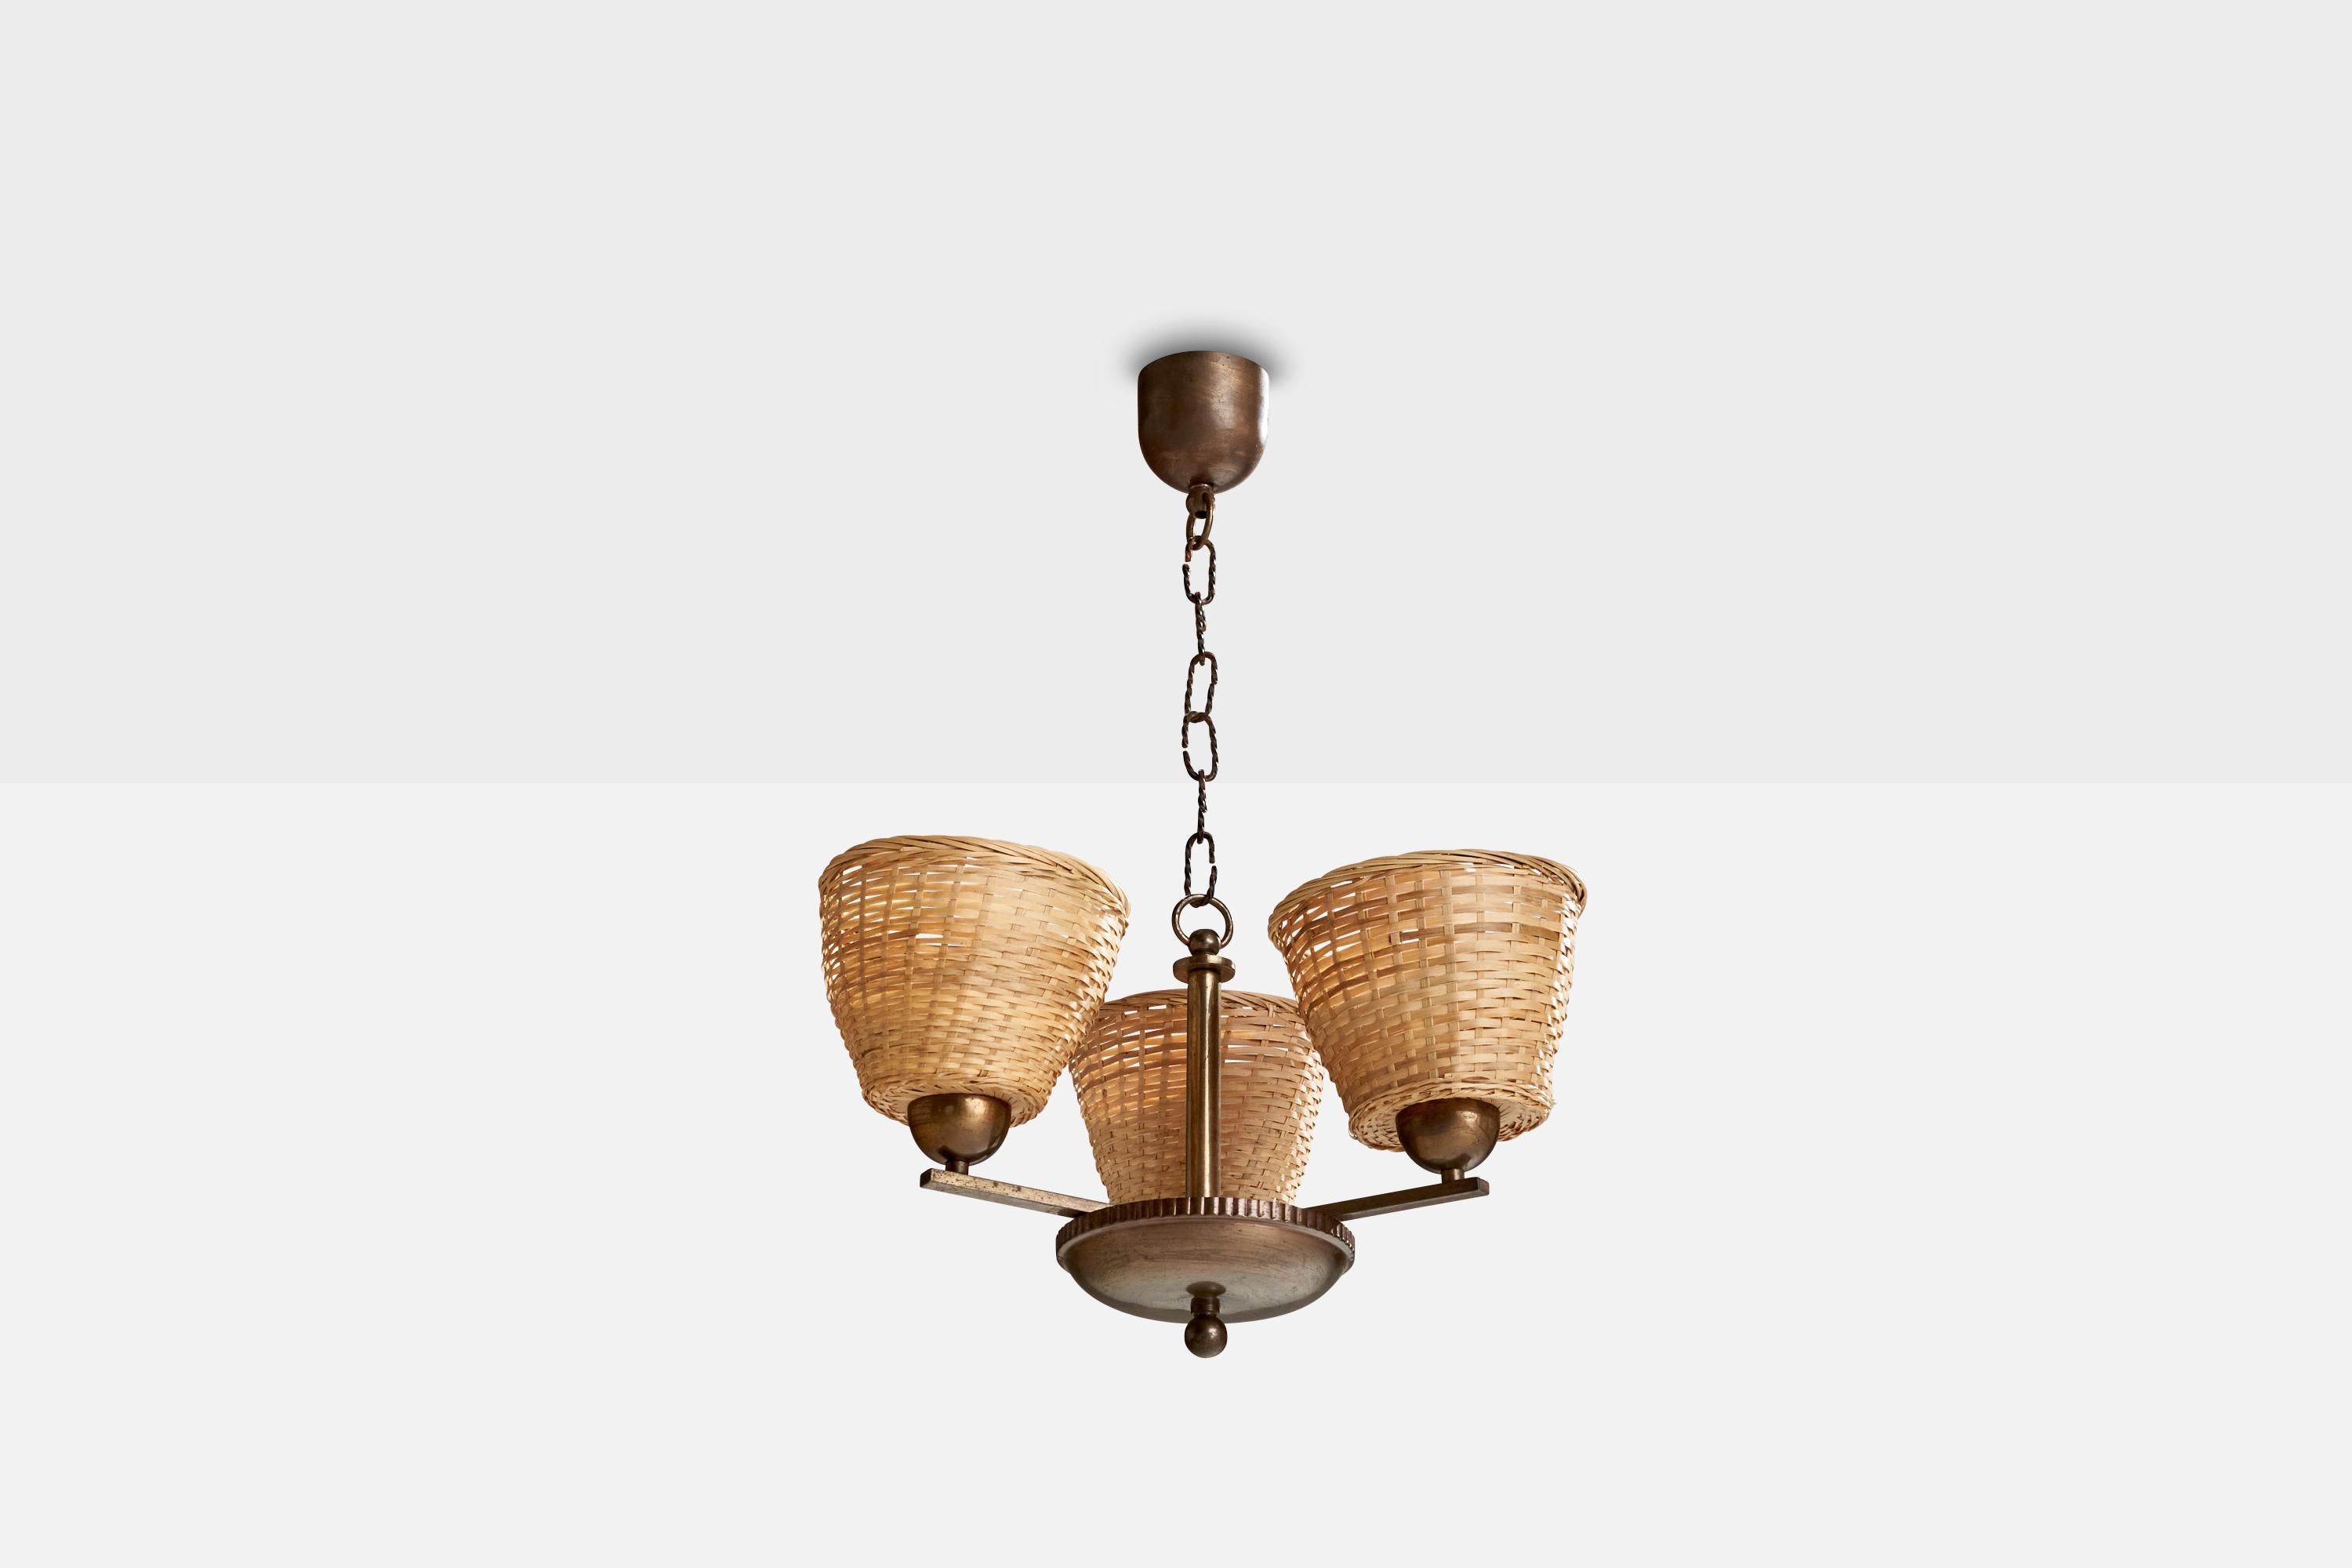 A brass and rattan chandelier, model 1409/3, designed by Paavo Tynell and produced by Taito, Finland, c. 1930s.

Dimensions of canopy (inches): 3.29” H x 3.86” Diameter
Socket takes standard E-26 bulbs. 3 socket.There is no maximum wattage stated on